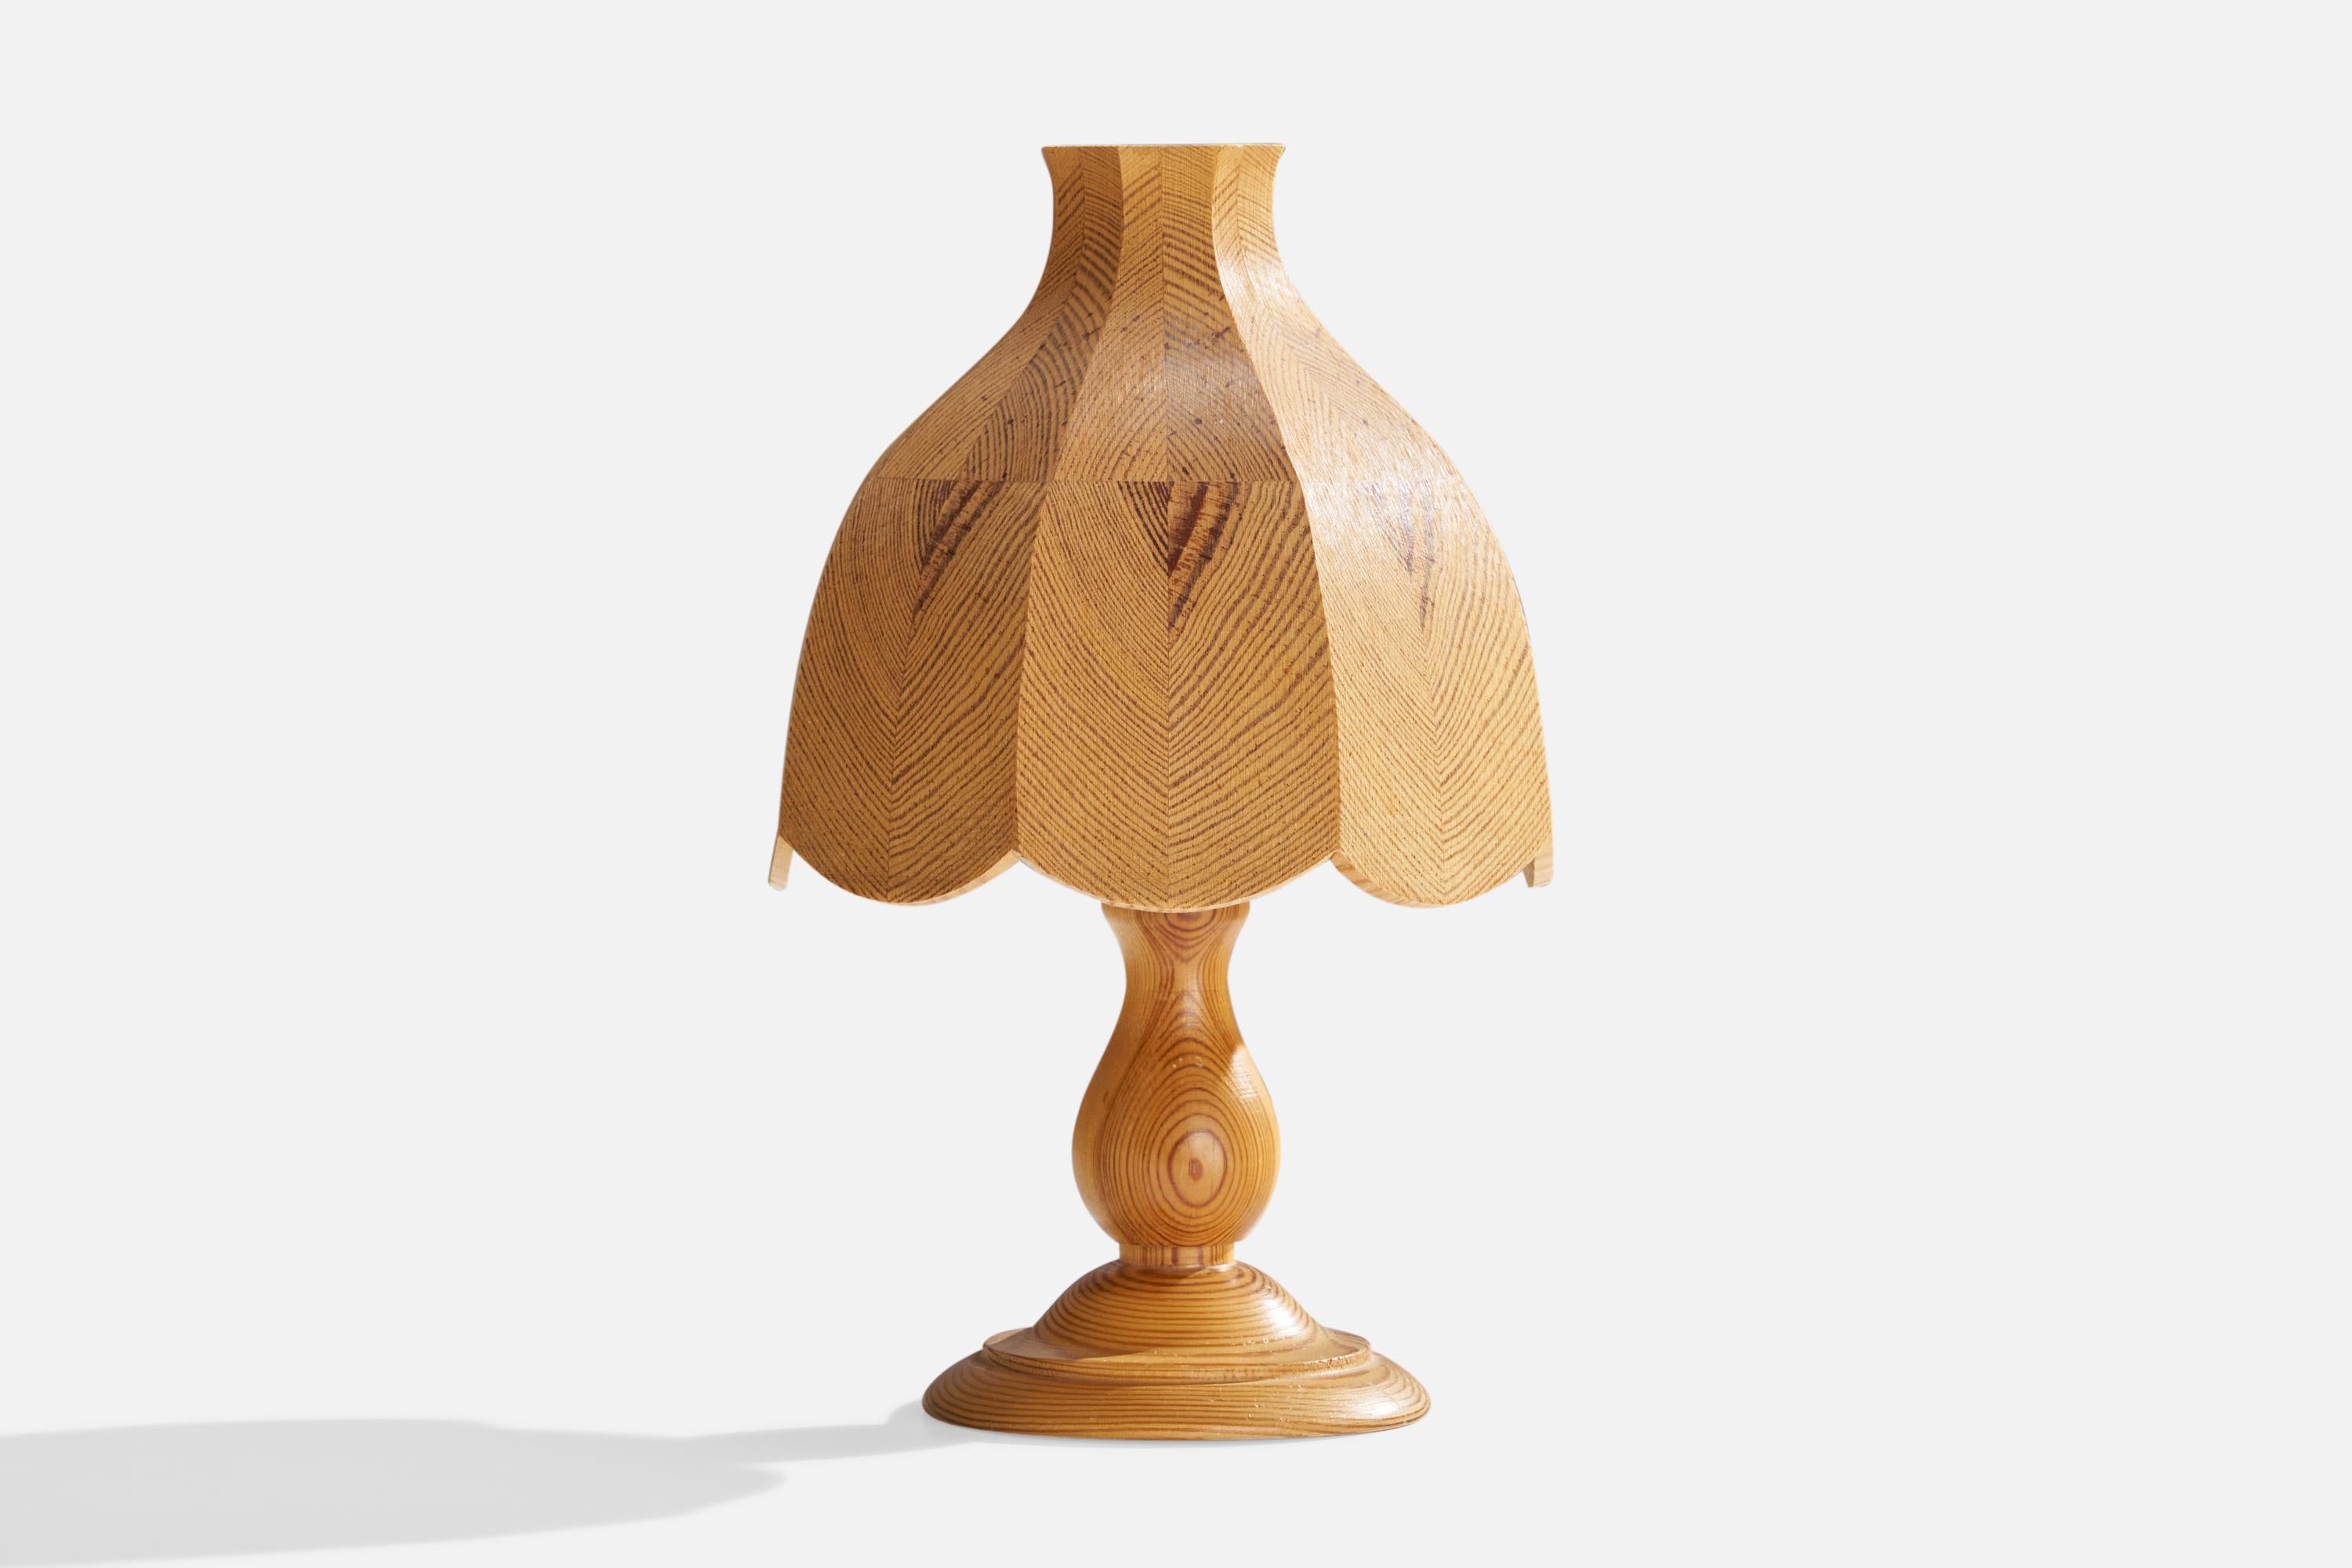 A pine table lamp produced by Candela, Sweden, c. 1980s.

Overall Dimensions (inches): 10.5” H x 7” D
Stated dimensions include shade.
Bulb Specifications: E-14 Bulb
Number of Sockets: 1
All lighting will be converted for US usage. We are unable to